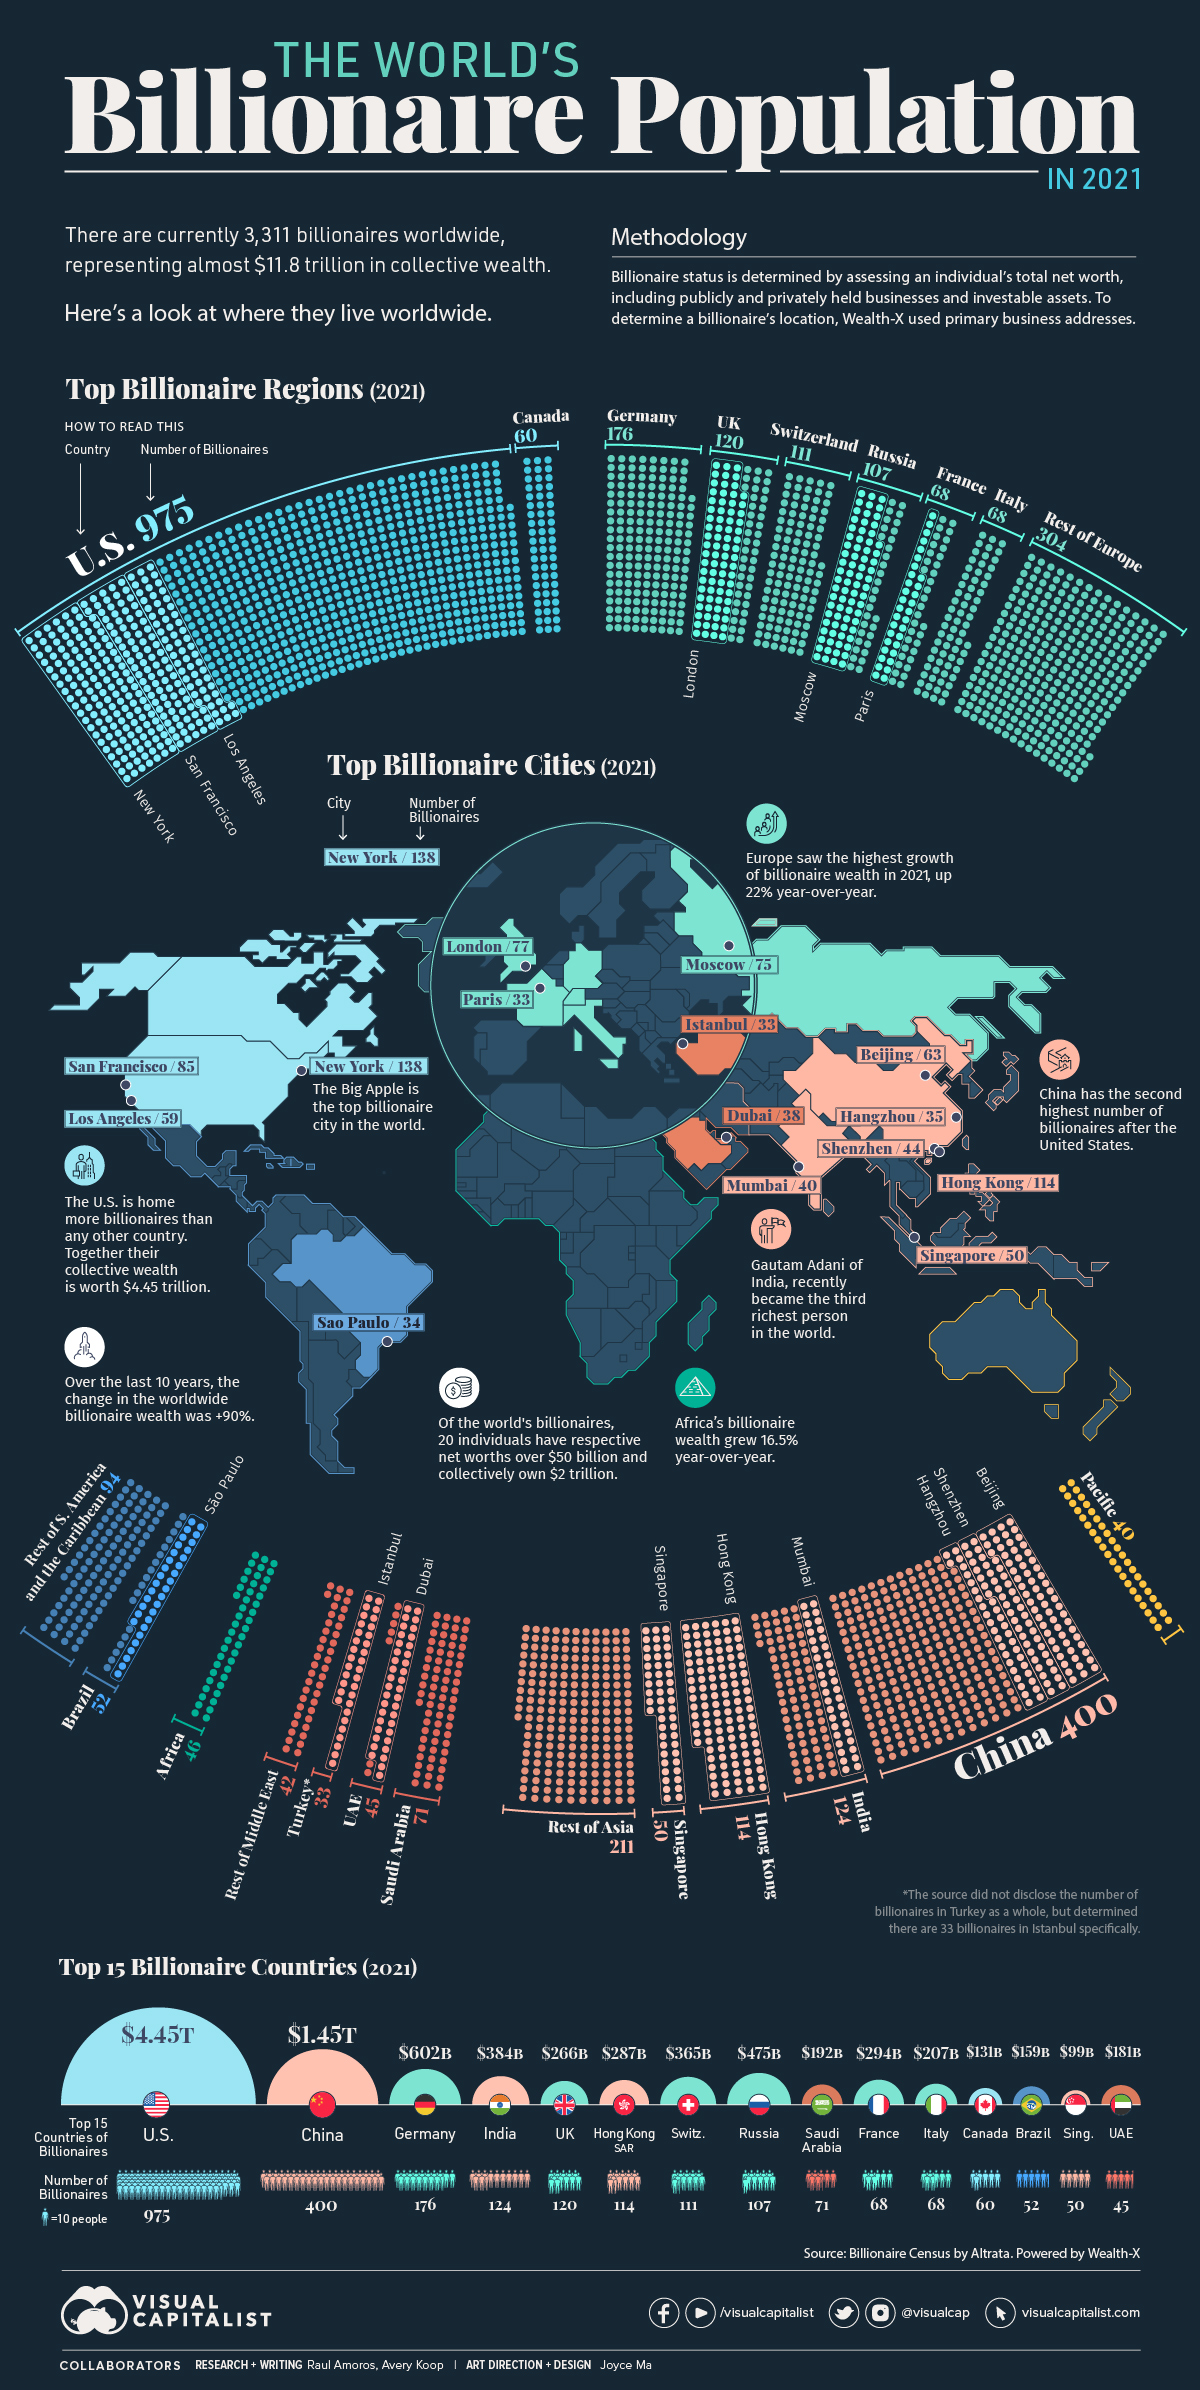 Data visualization showing the world's billionaire population by location